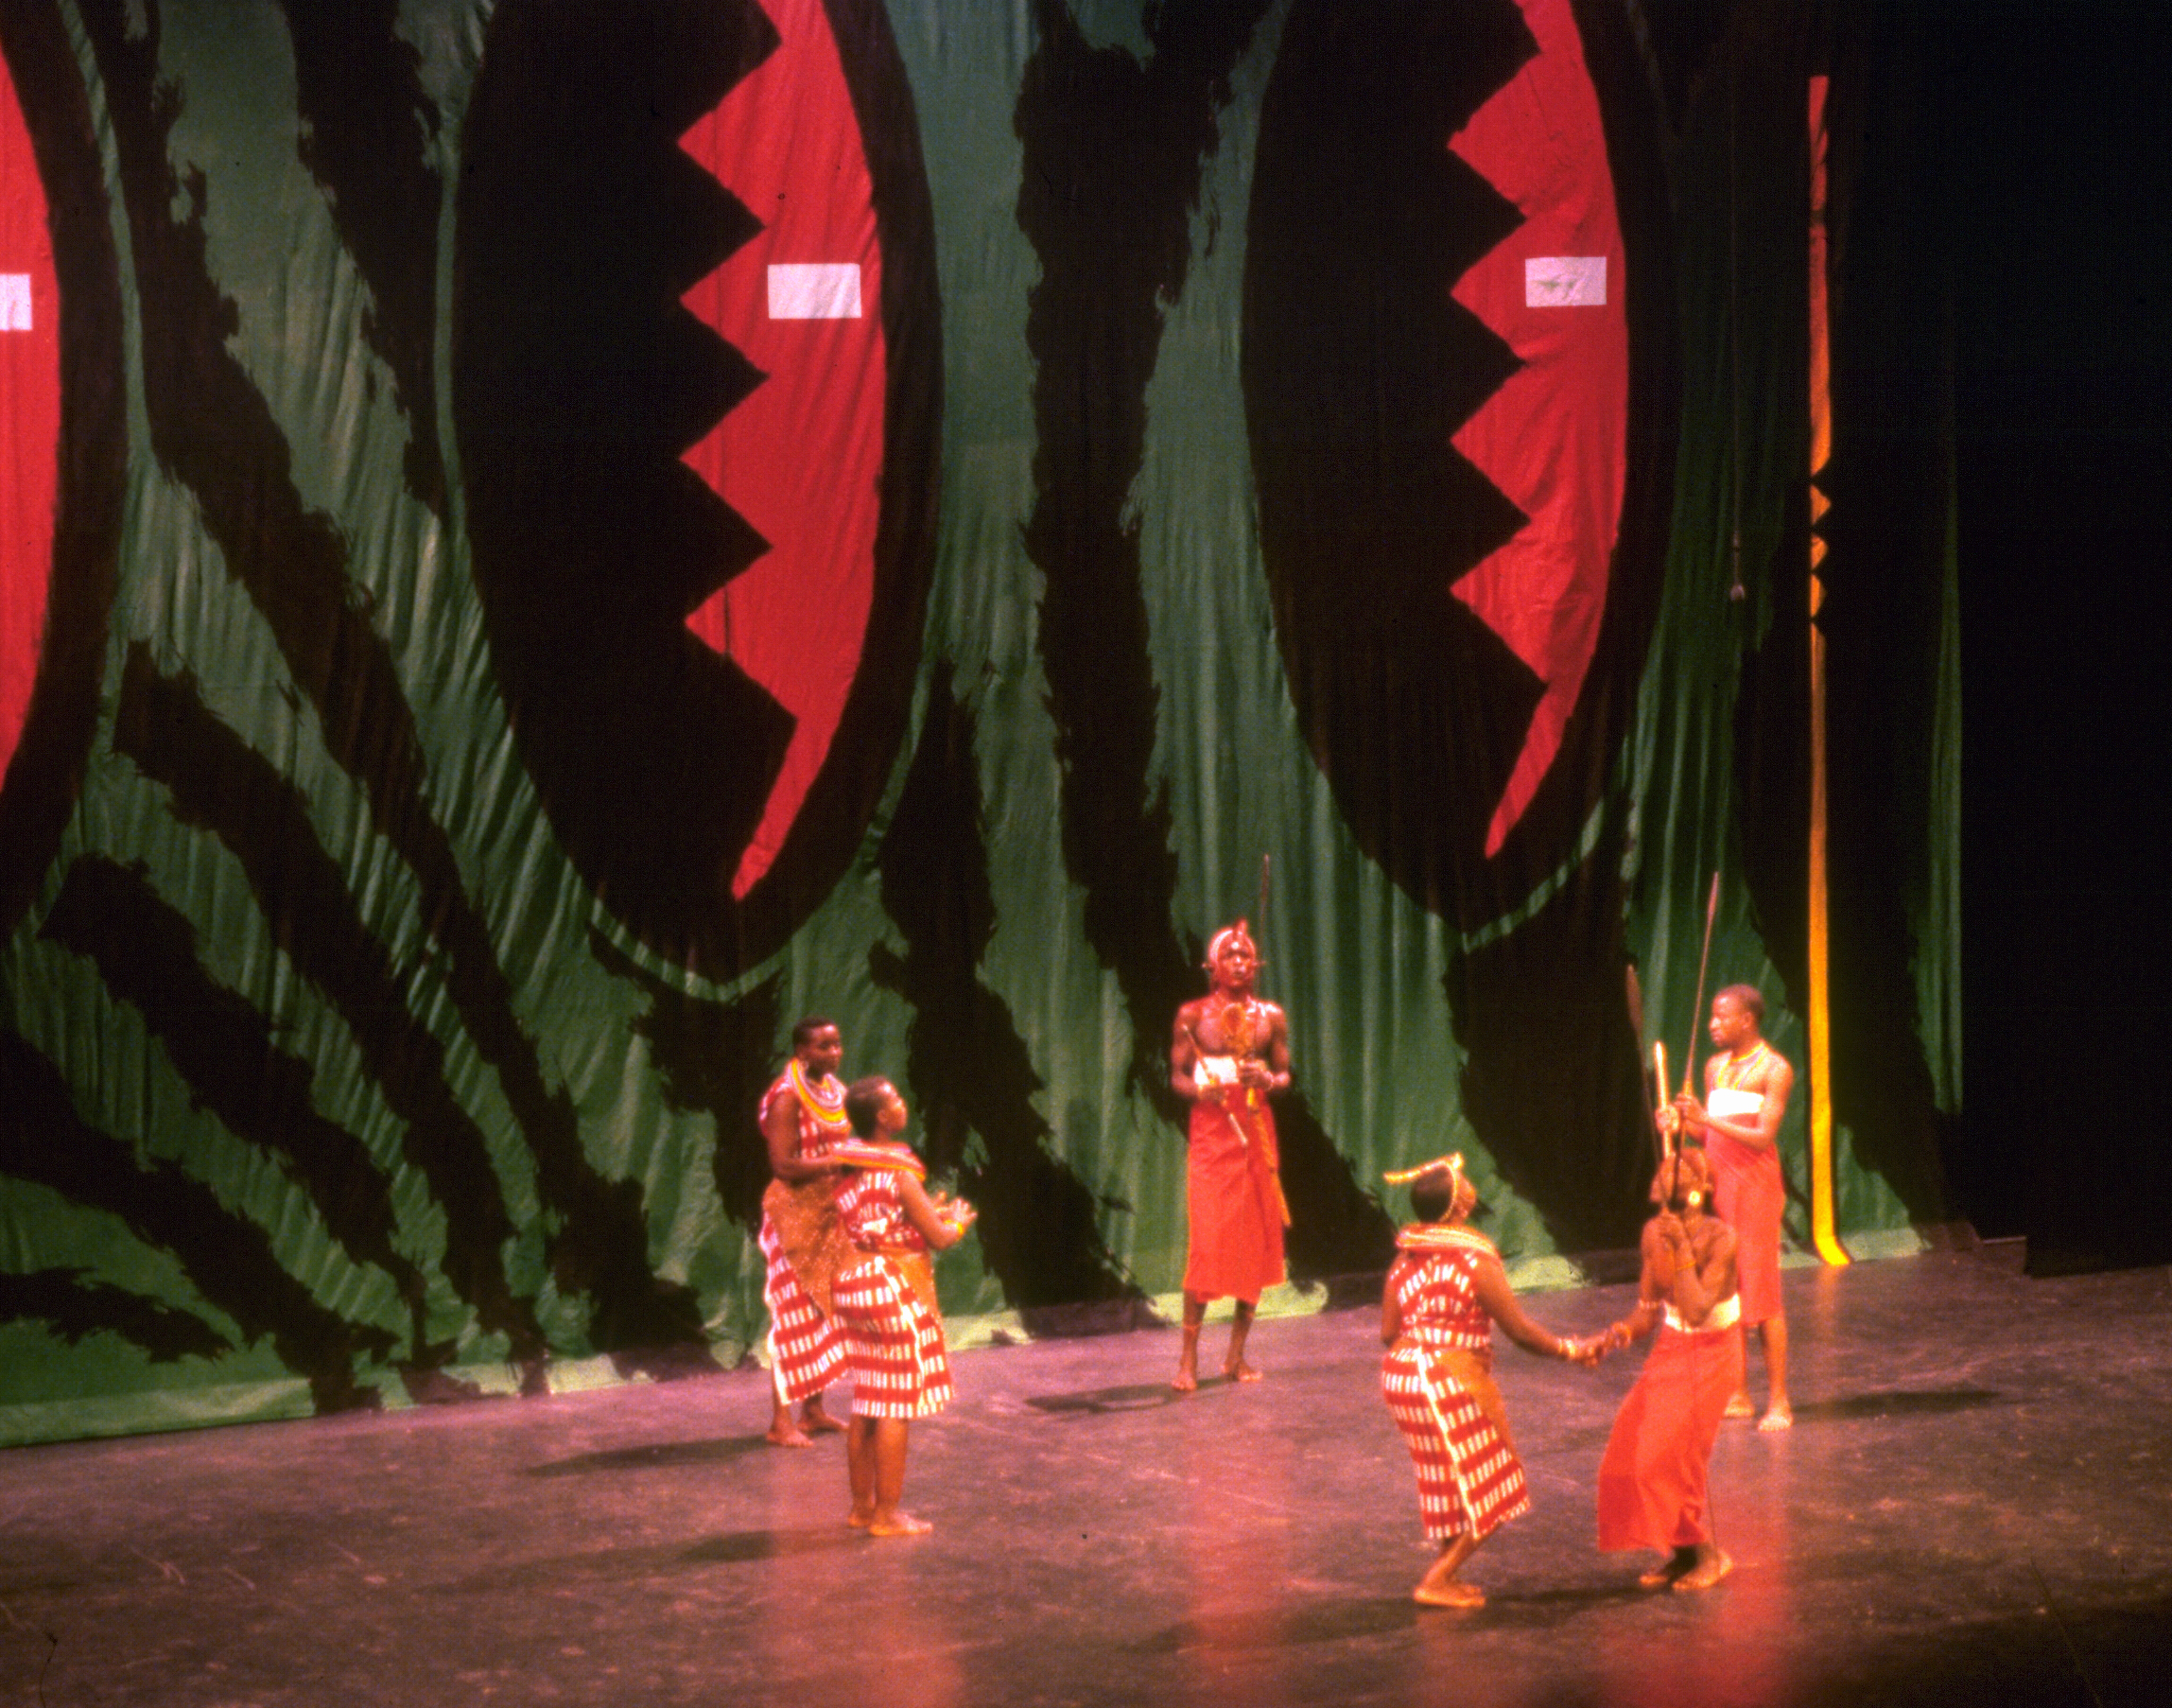  Memphis in May Celebrates Kenya set backdrop  Creative and design by Chuck Mitchell  Photo courtesy Memphis in May 